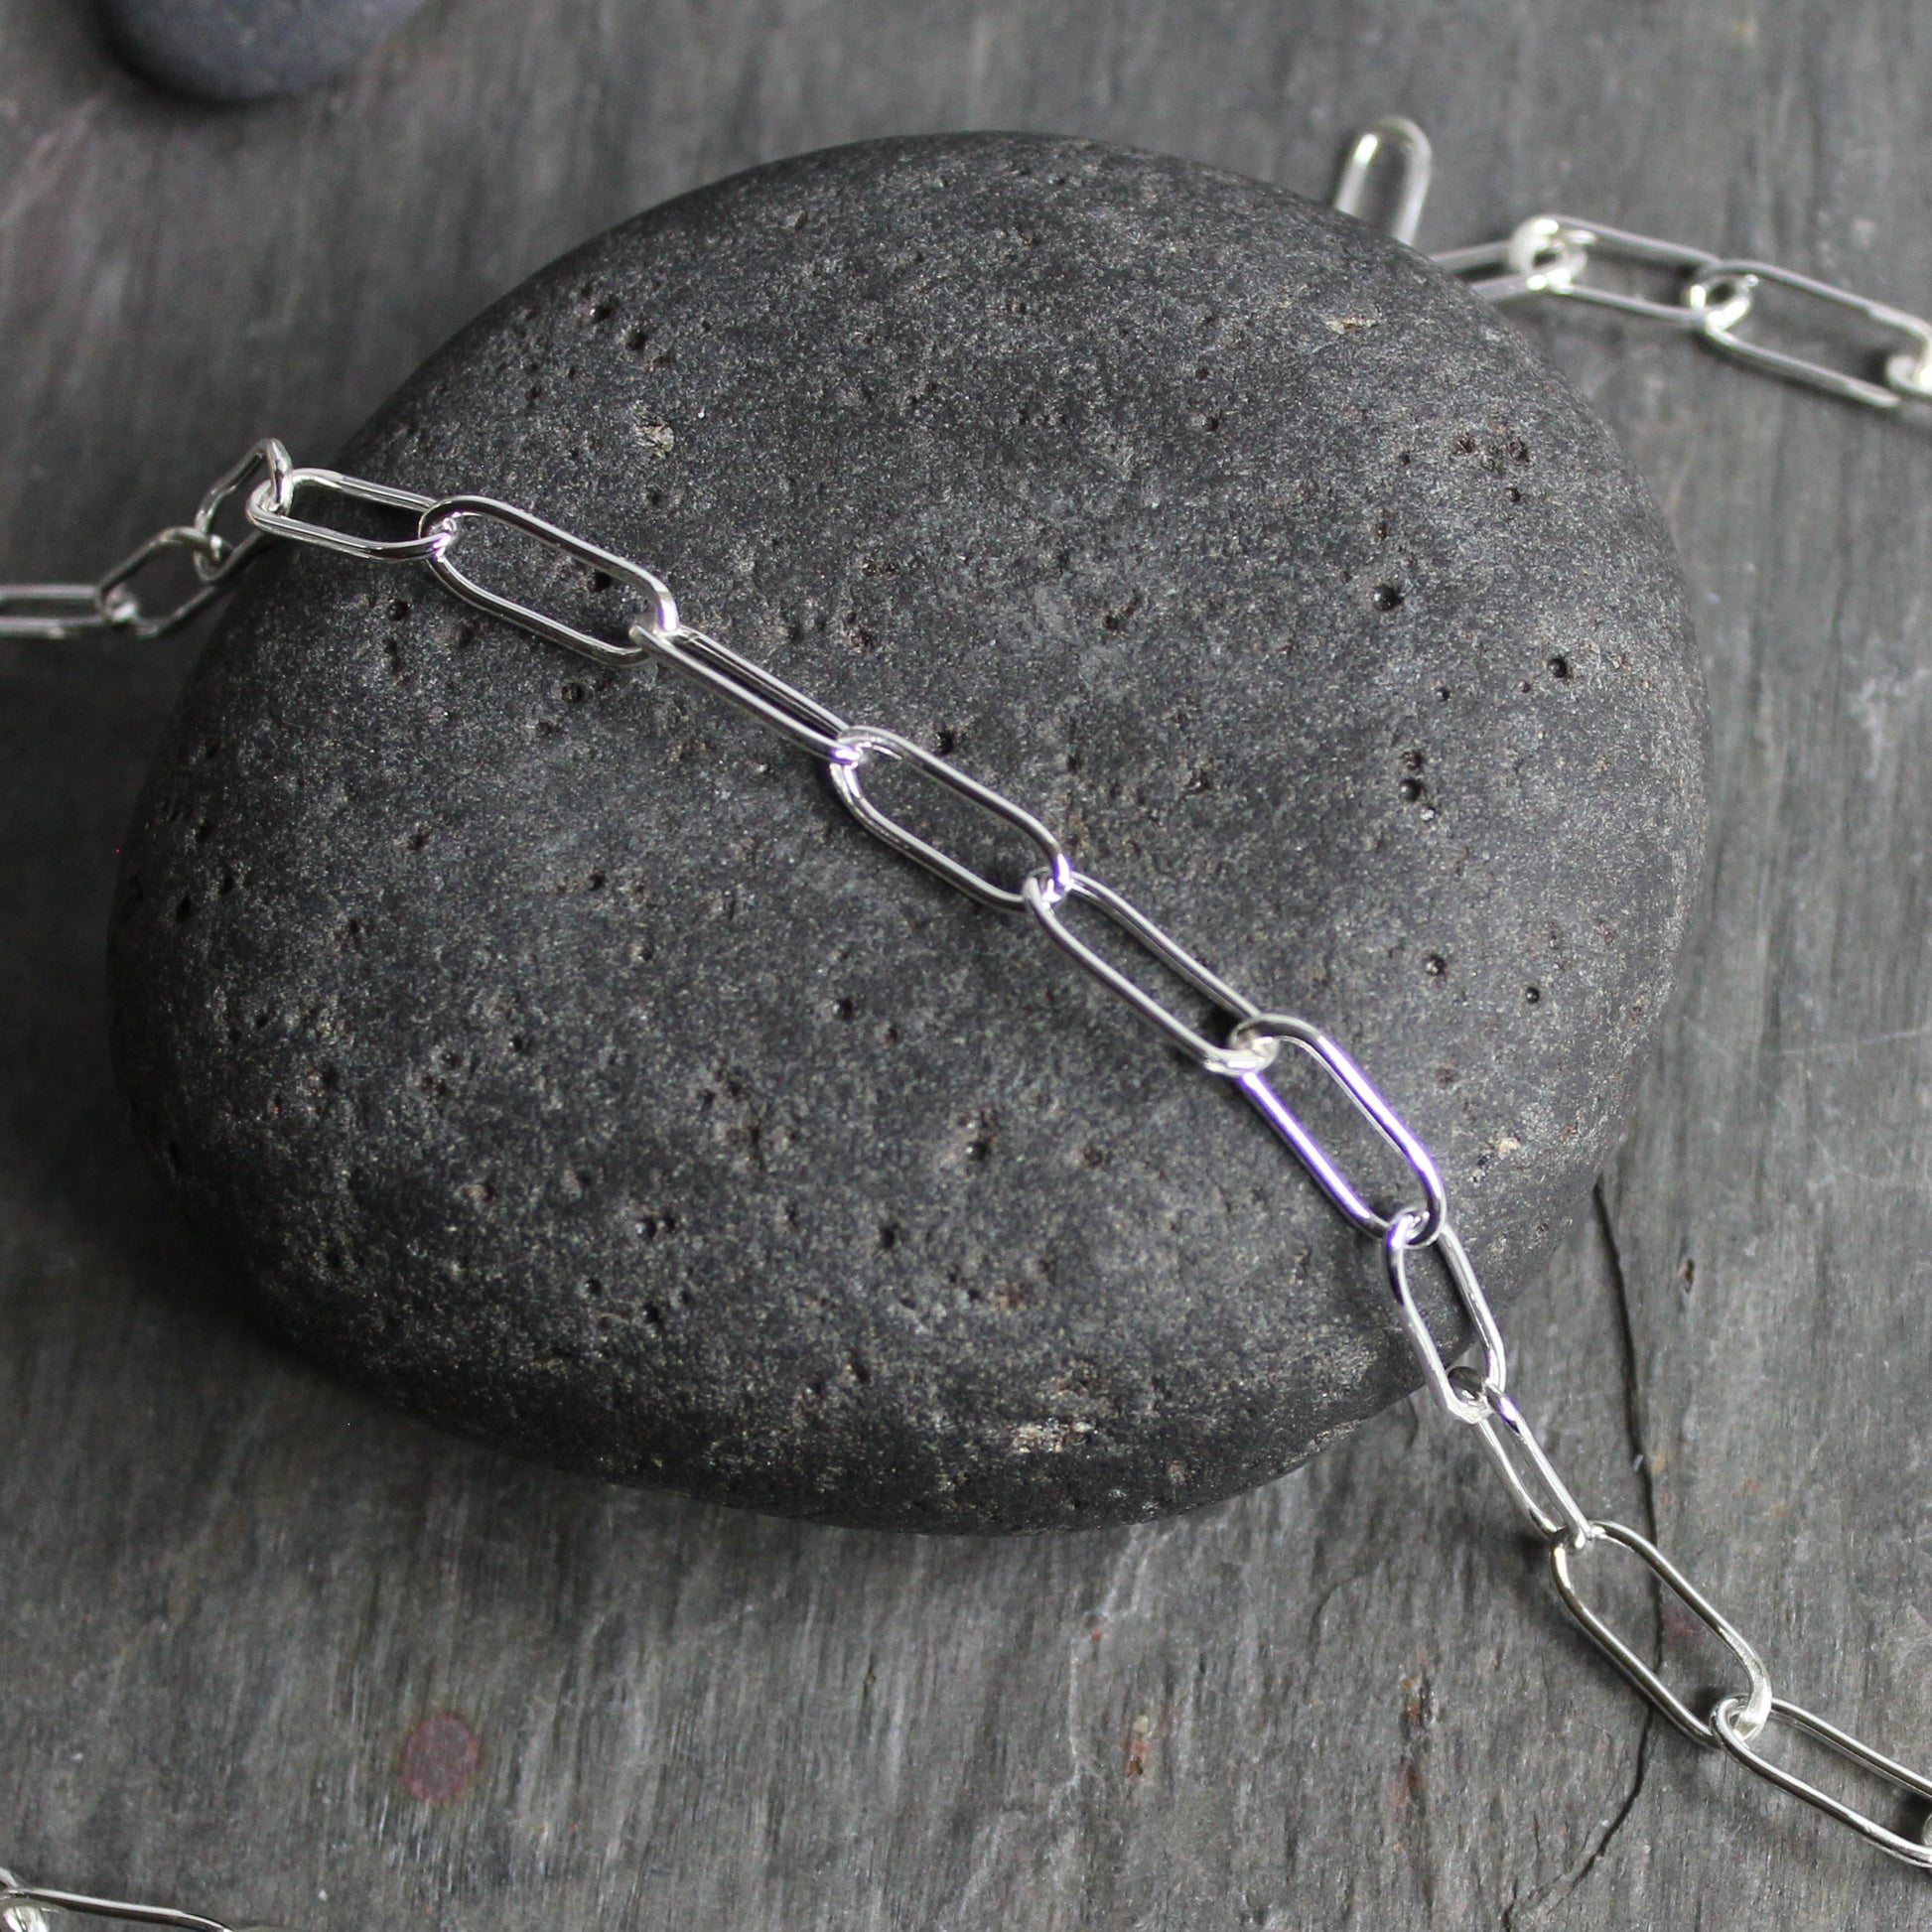 A sterling silver paperclip link chain handmade with 18 gauge sterling silver wire and finished with a lobster clasp. 